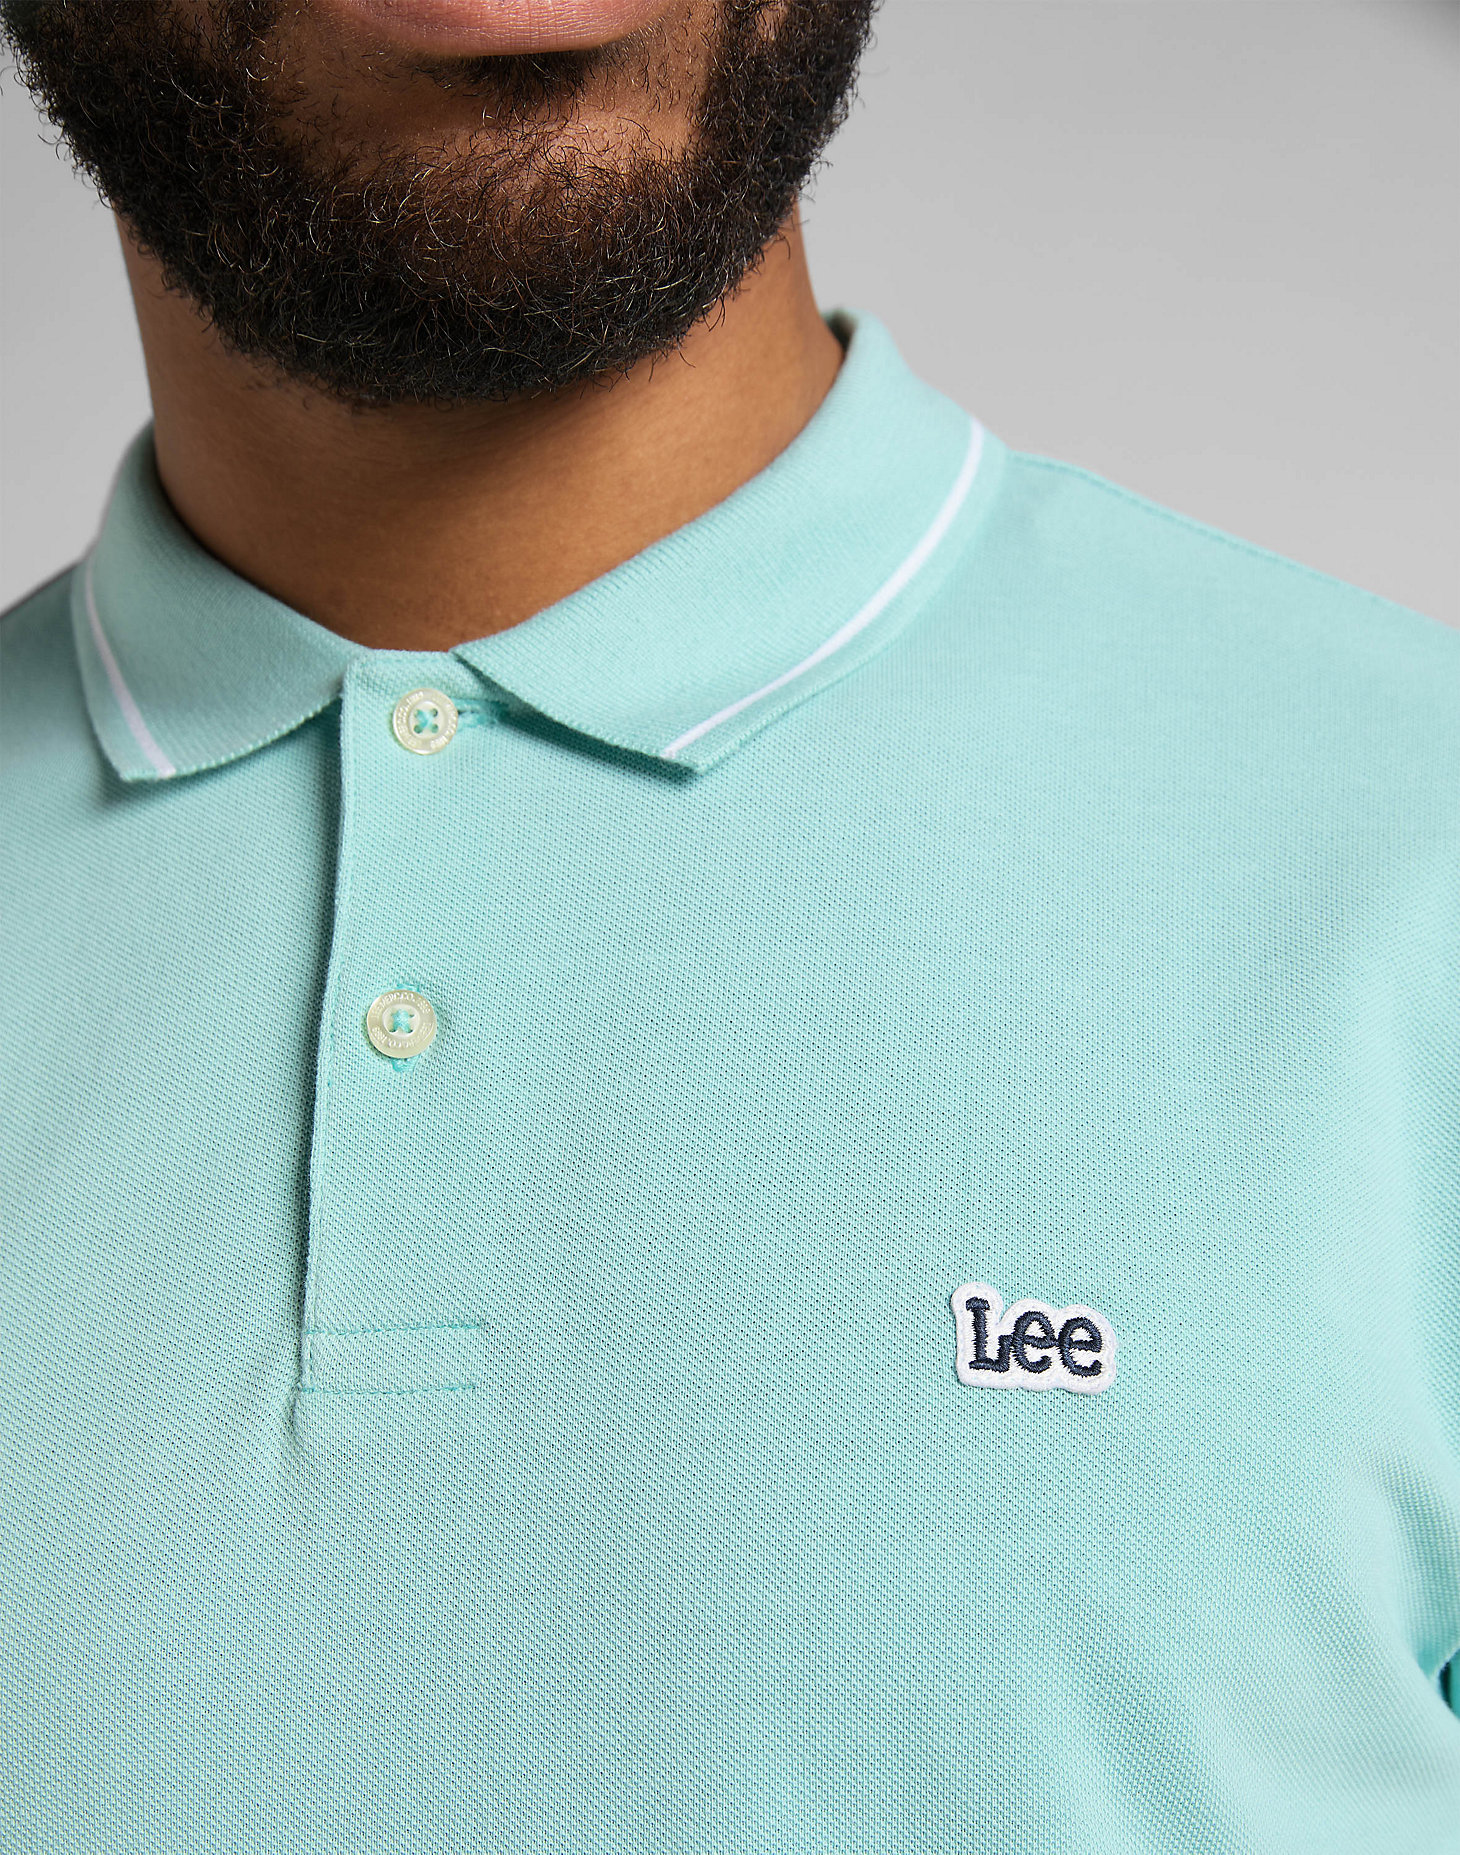 Pique Polo in Mint Blue main view